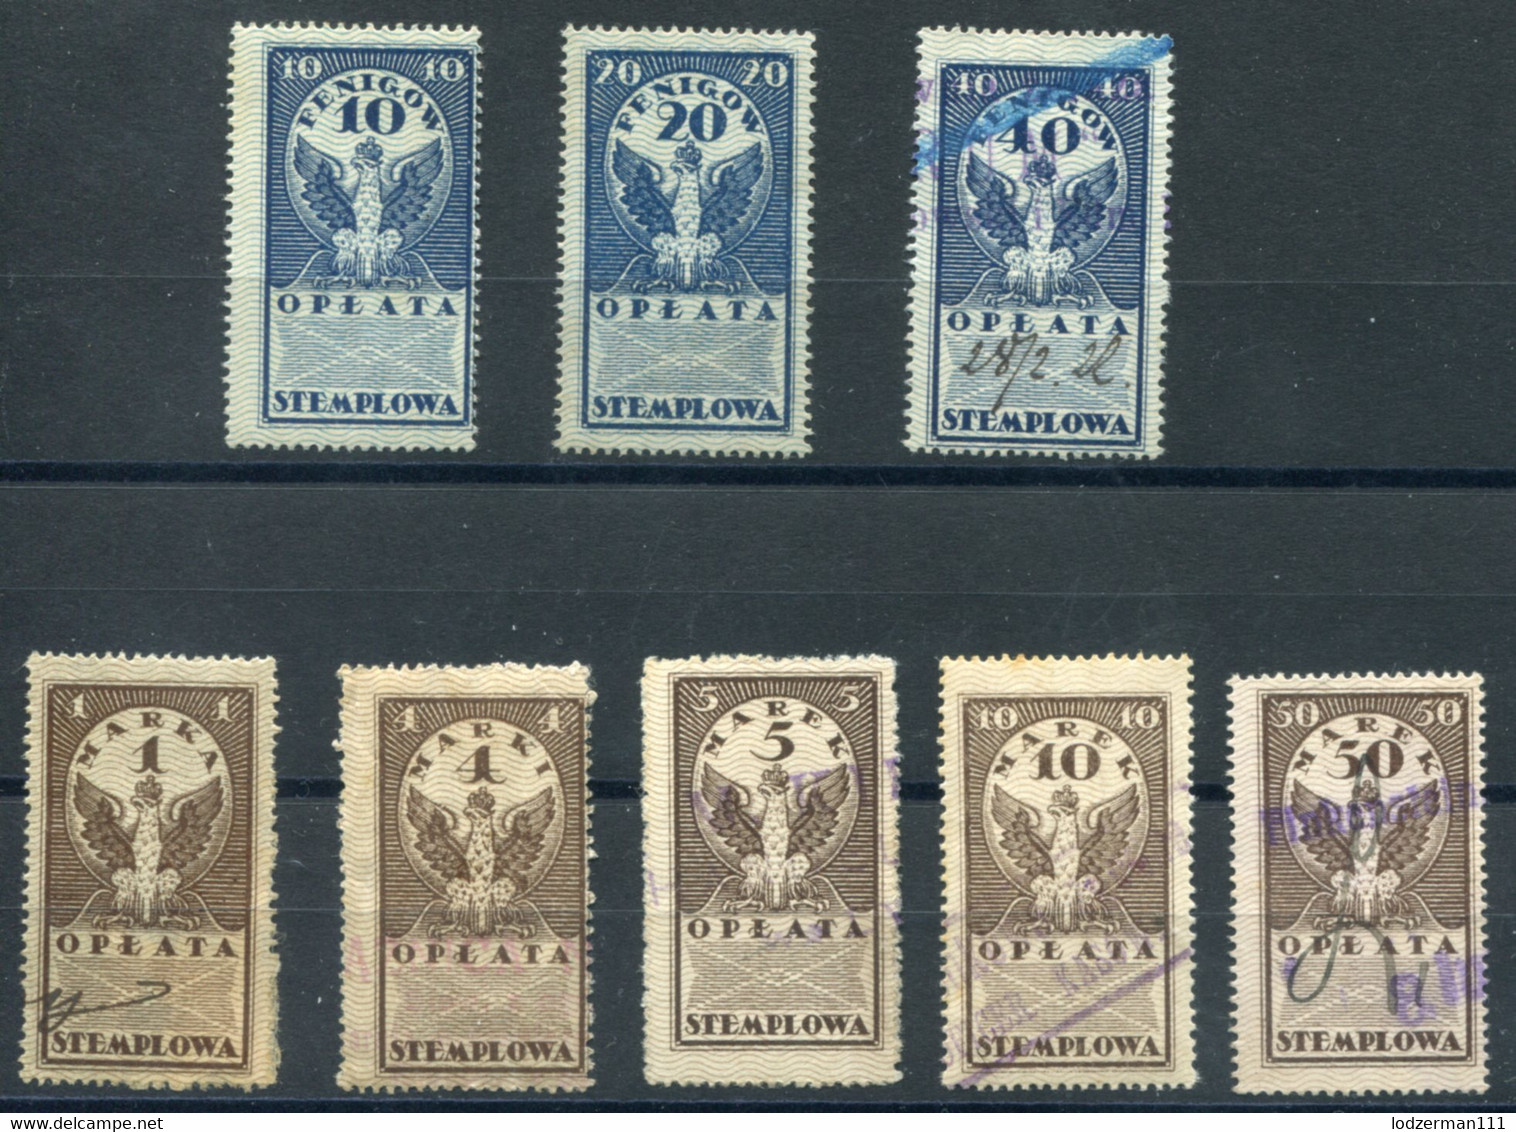 1920 General Edition Perf. #12-14, 16, 18-20, 22 Mix - Fiscaux